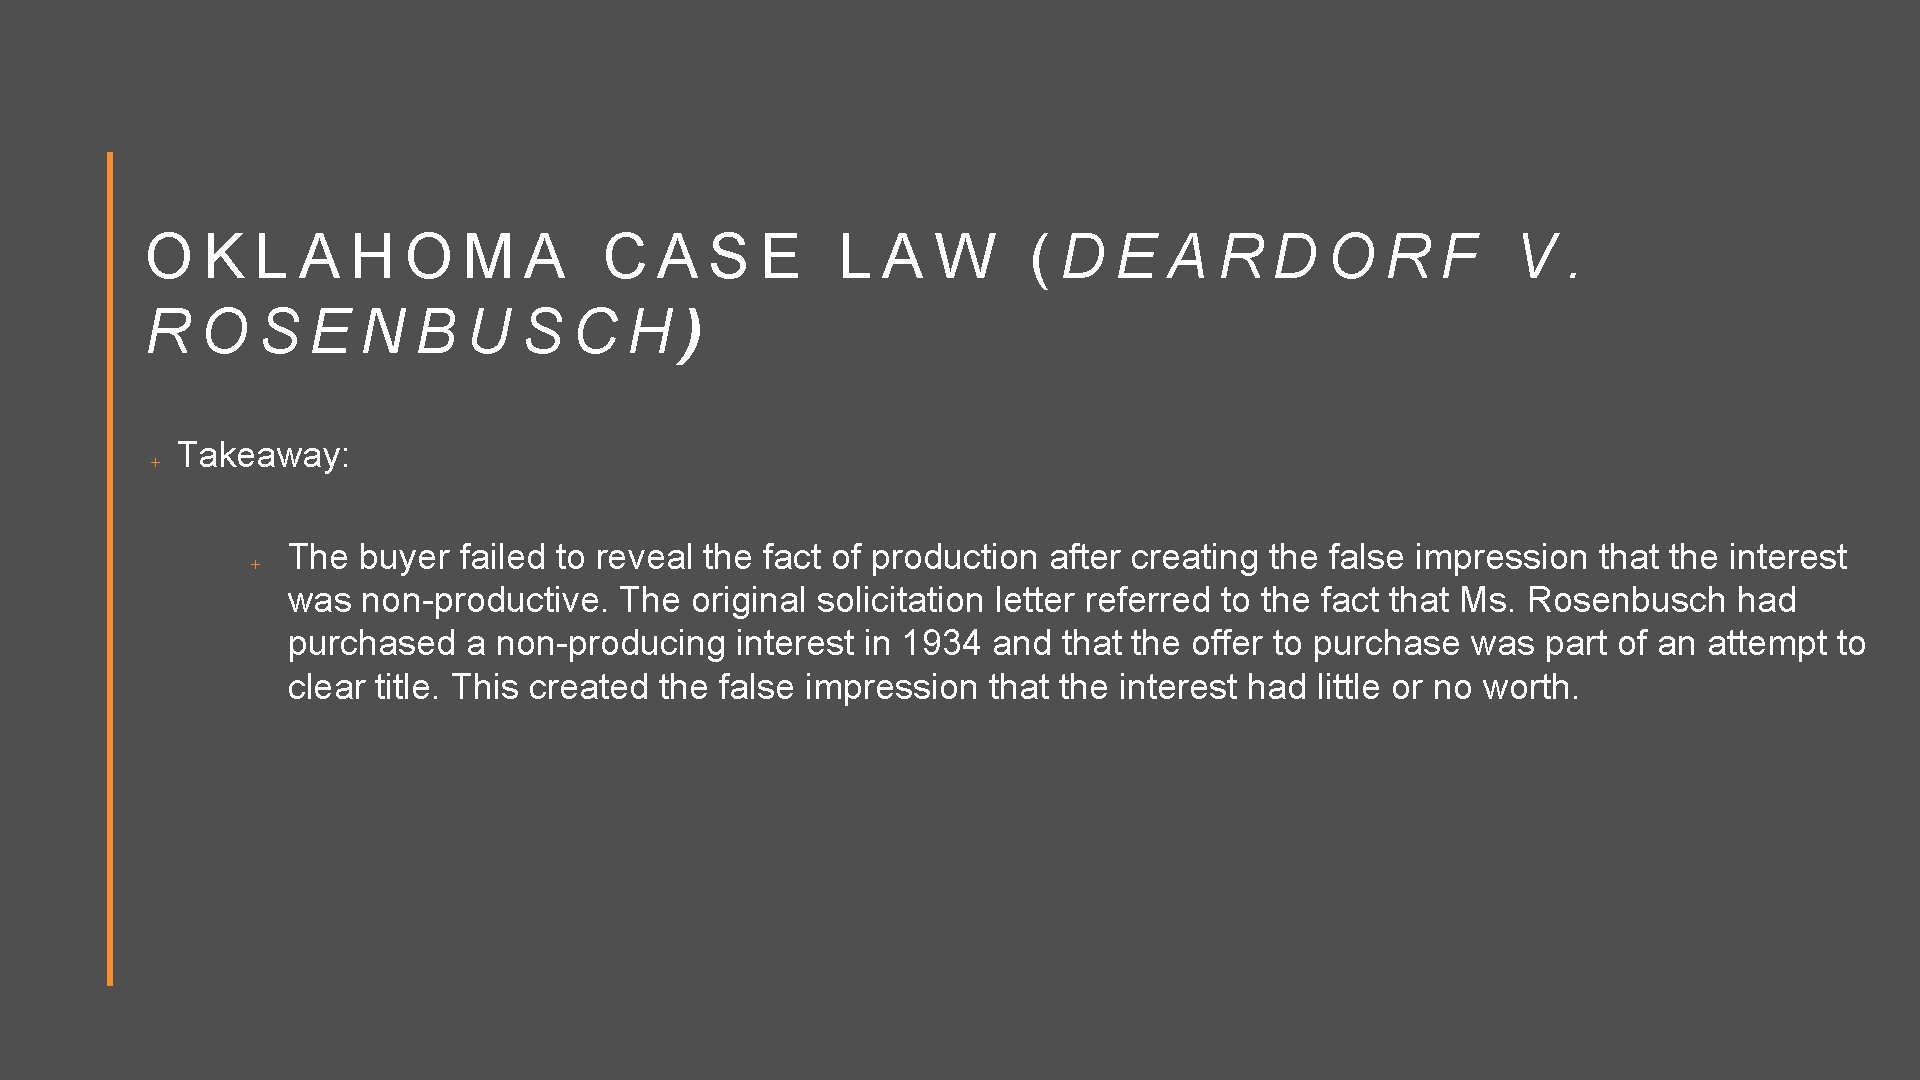 OKLAHOMA CASE LAW (DEARDORF V. ROSENBUSCH) Takeaway: The buyer failed to reveal the fact